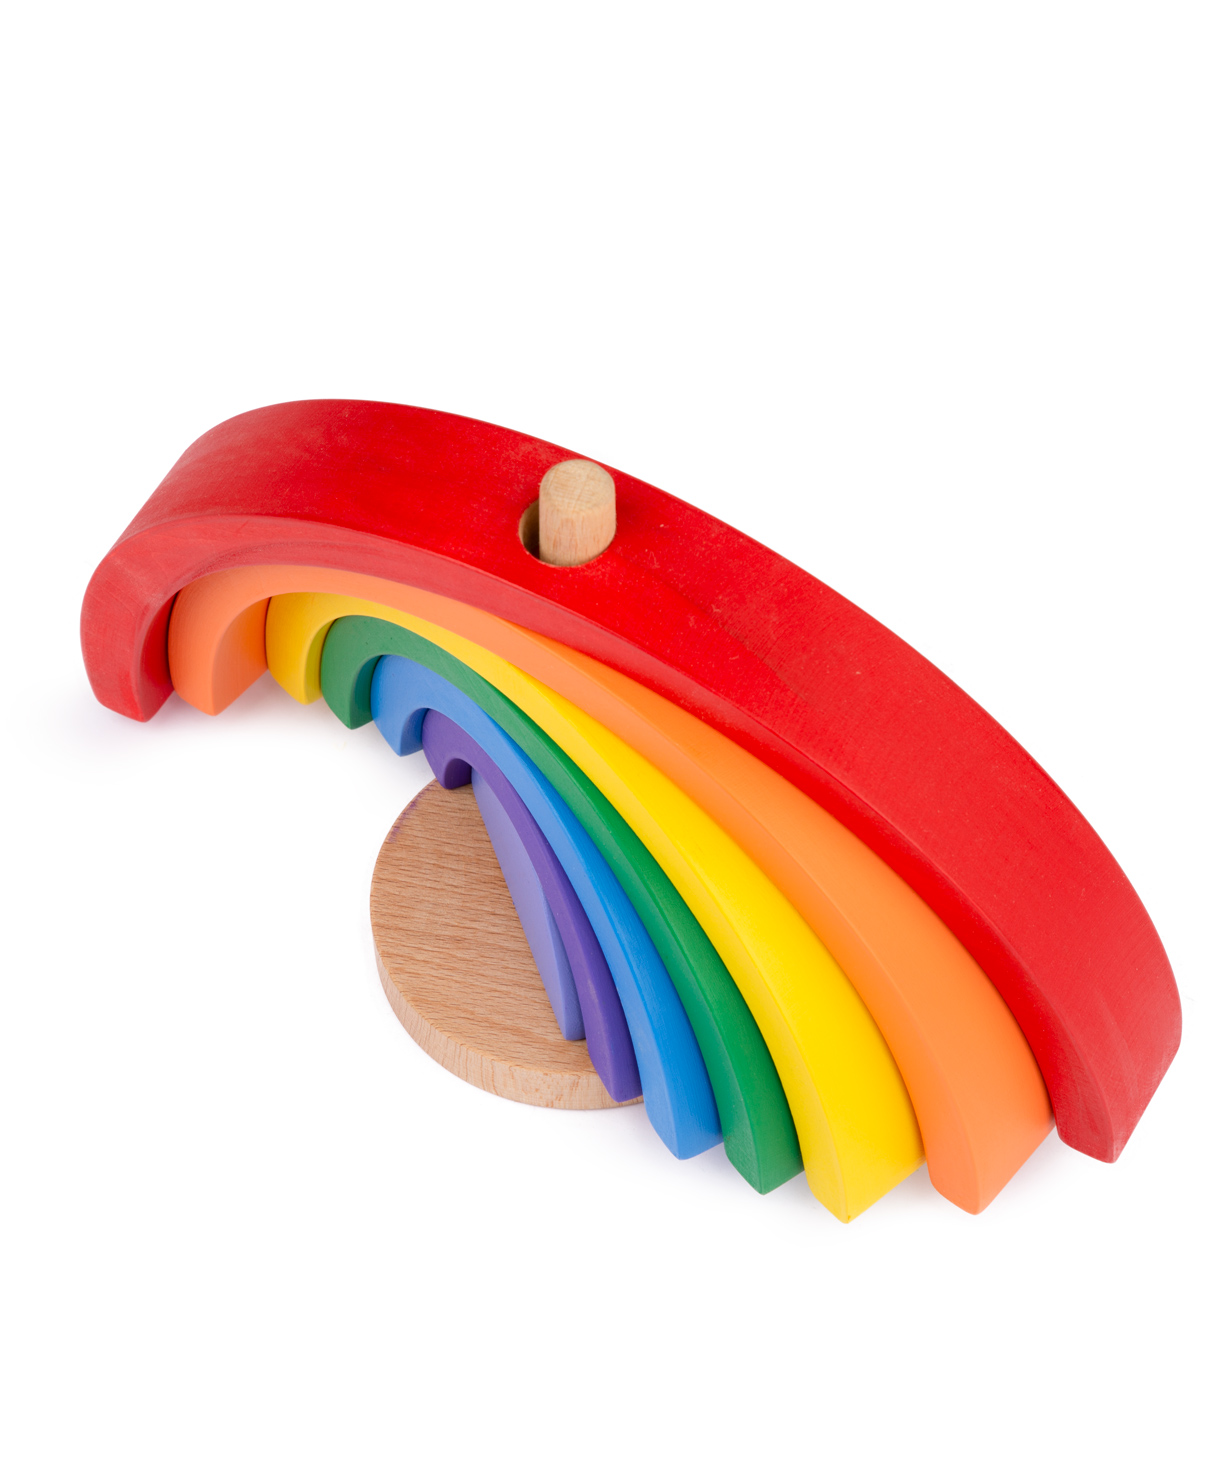 Toy `I'm wooden toys` tower, rainbow